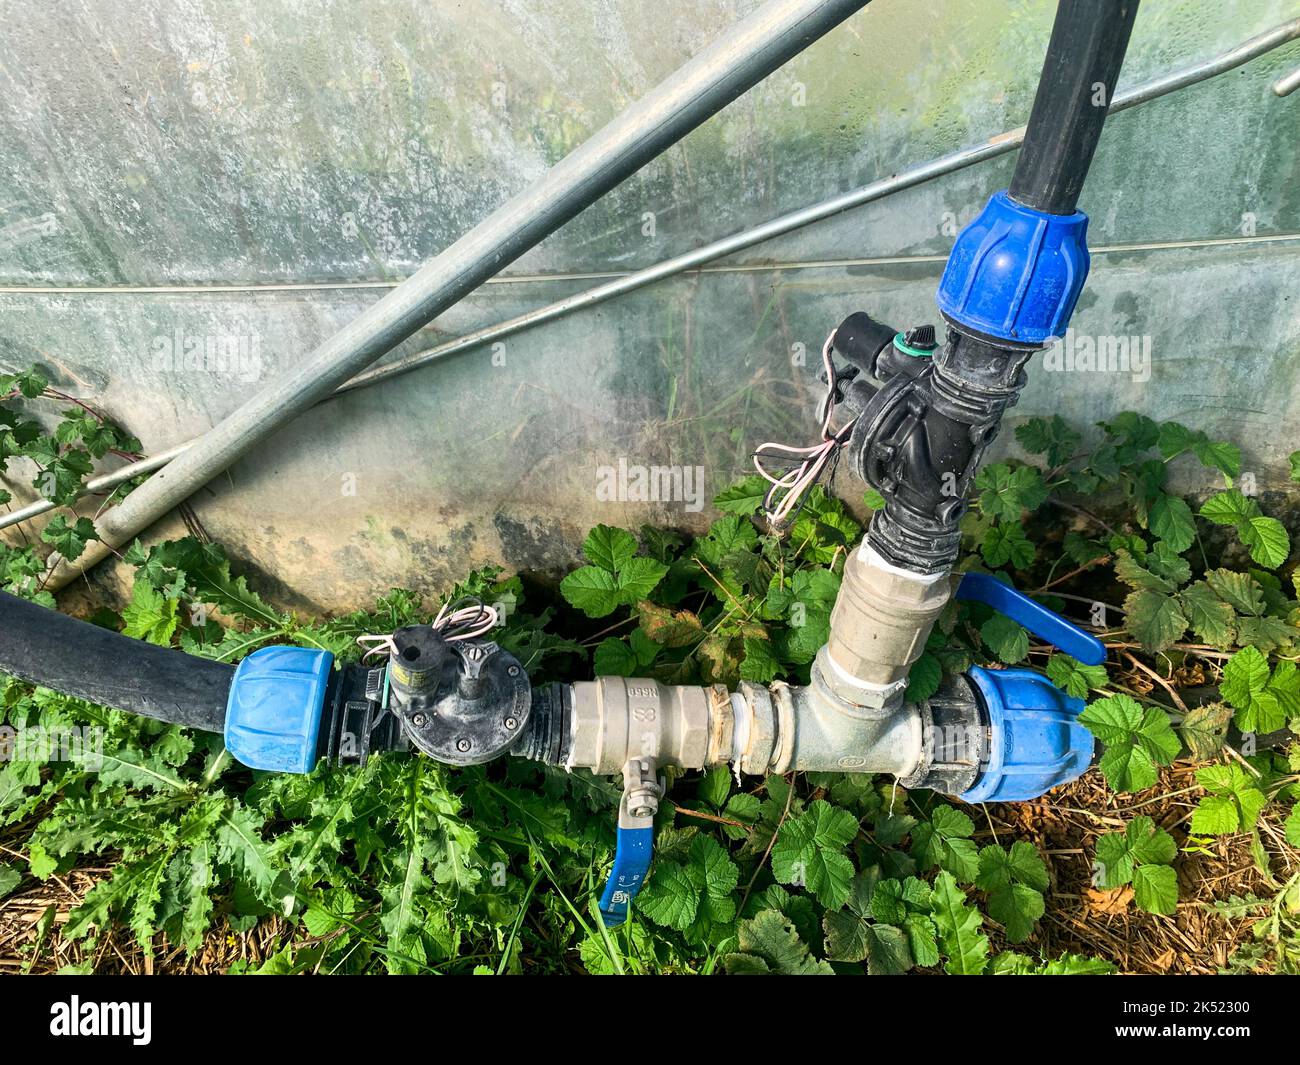 Vegetable cultivation, watering system in a greenhouse of vegetable crops, Saint-Priest, Rhone, AURA Region, France Stock Photo